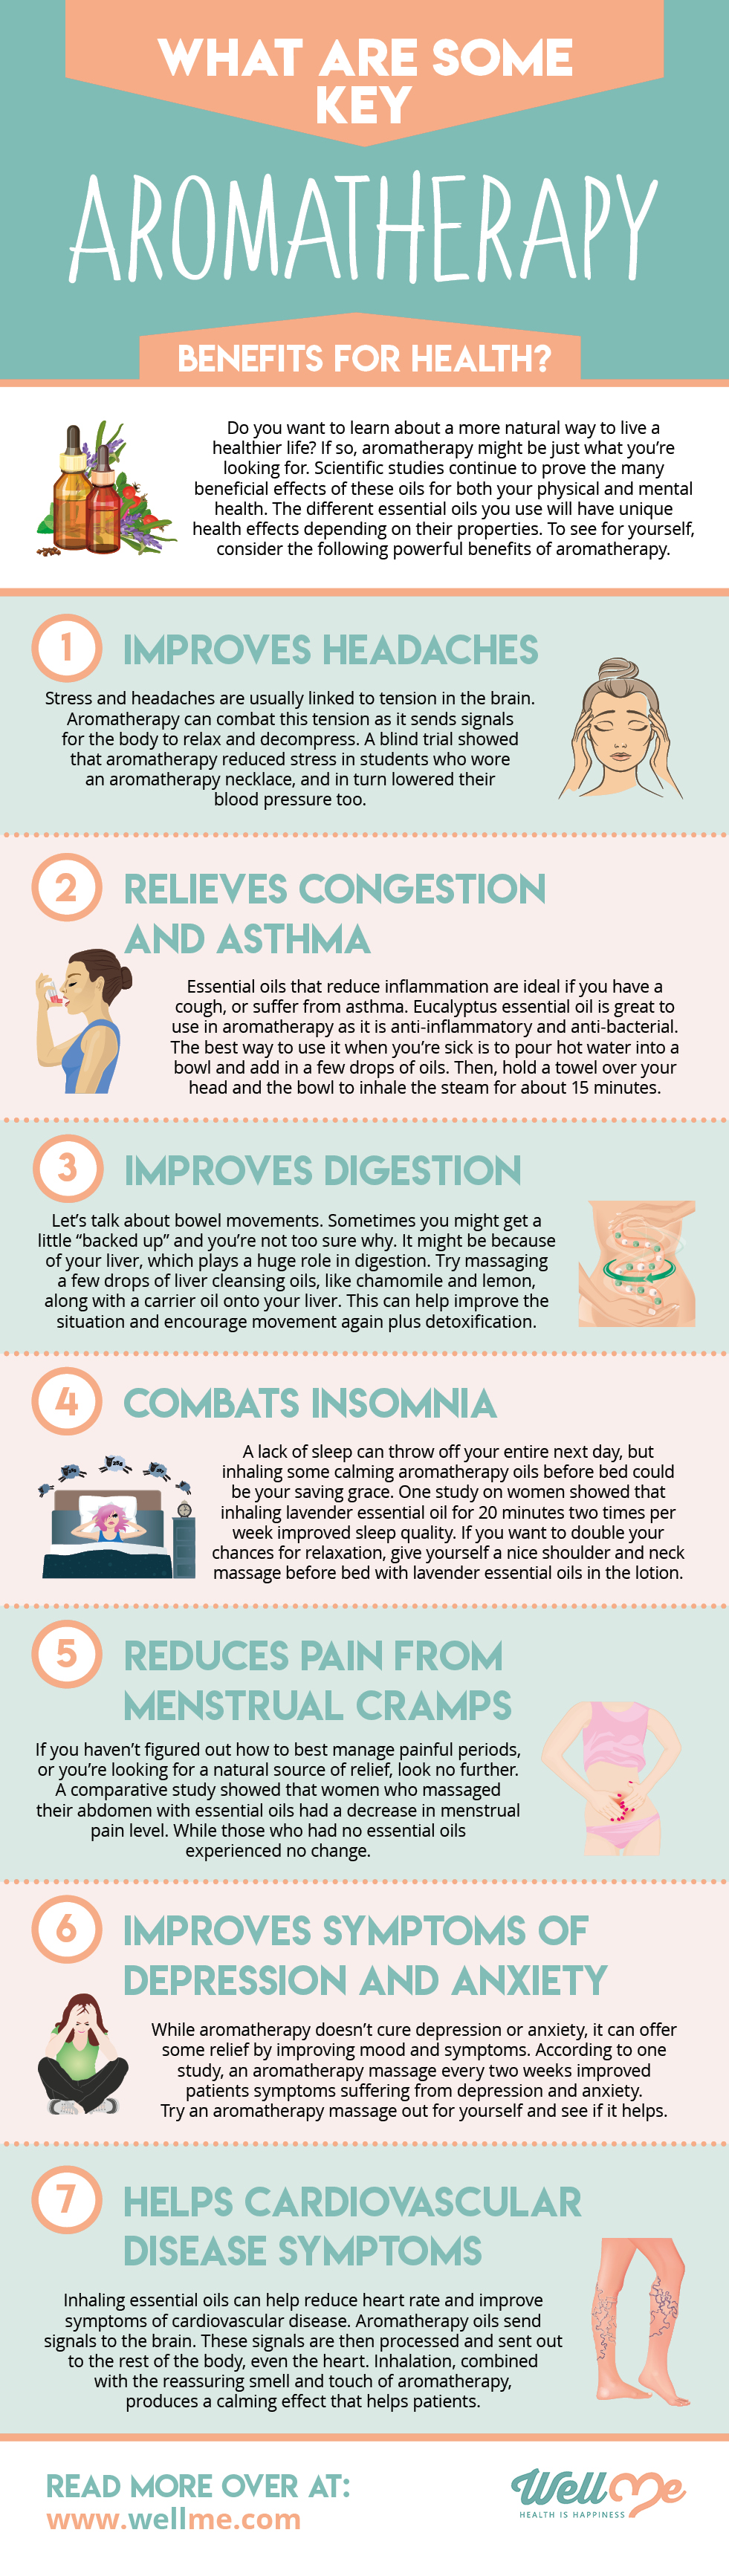 What Are Some Key Aromatherapy Benefits for Health? infographic